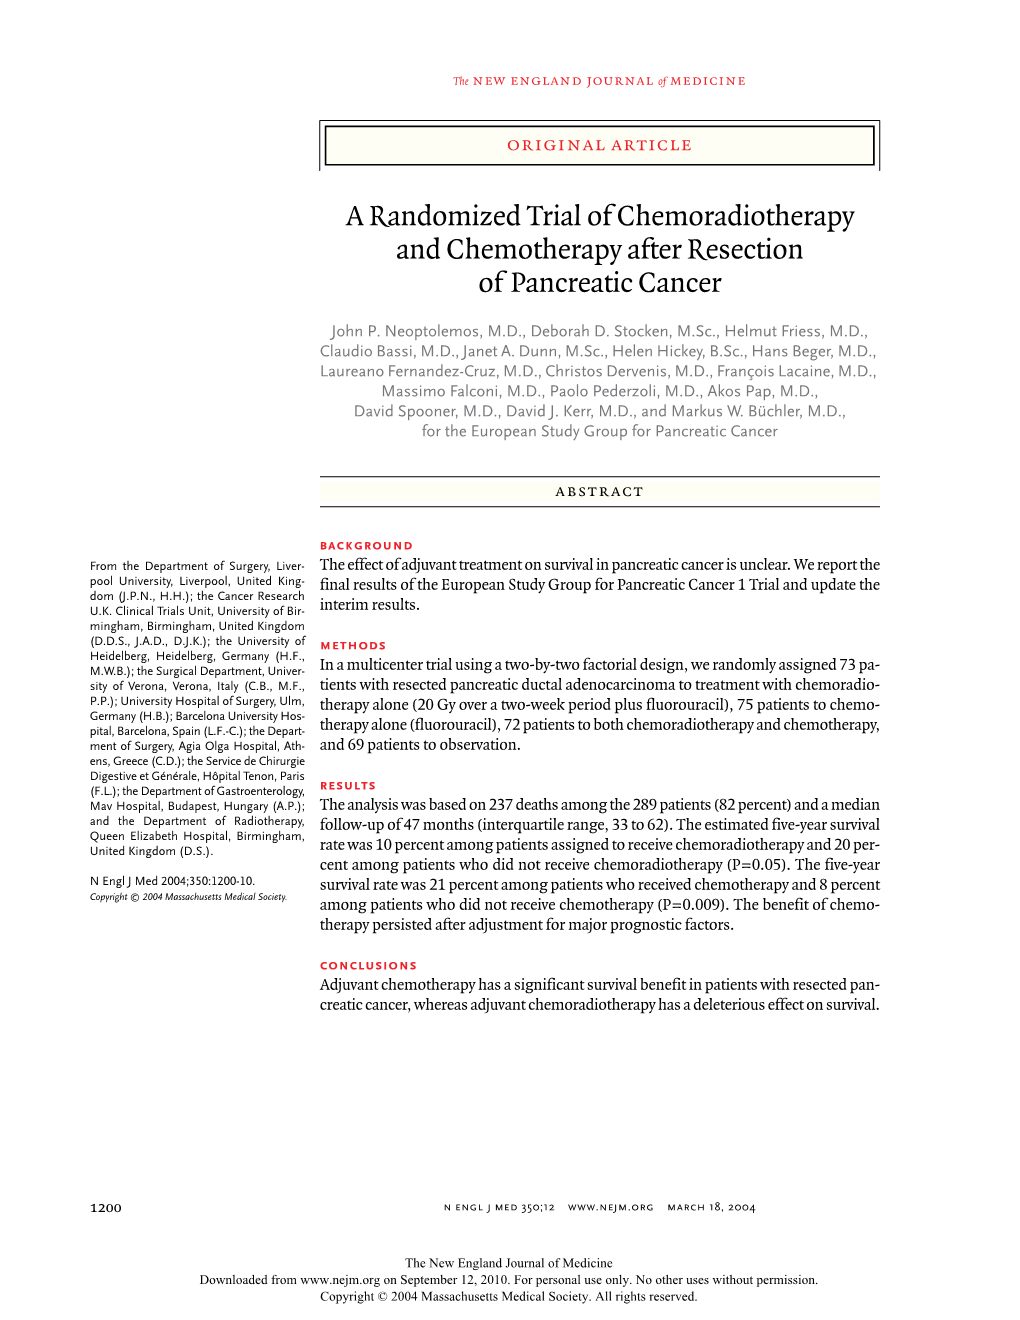 A Randomized Trial of Chemoradiotherapy and Chemotherapy After Resection of Pancreatic Cancer